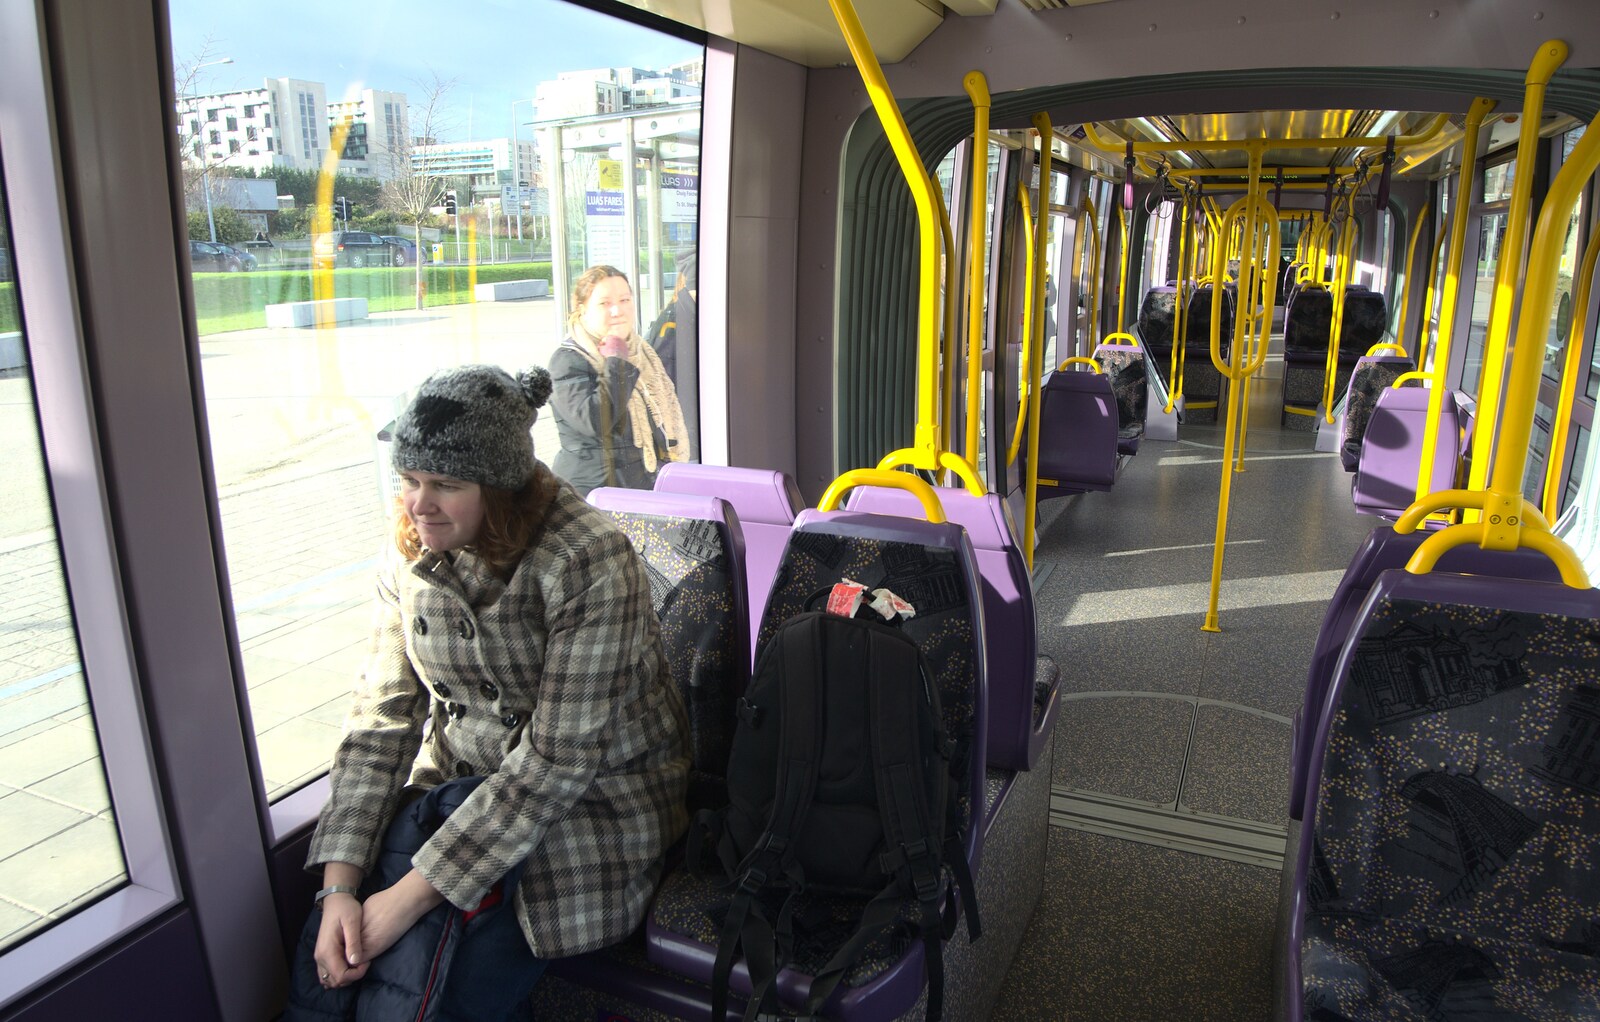 A Day in Dublin, Ireland - 7th January 2012: Isobel on the LUAS tram